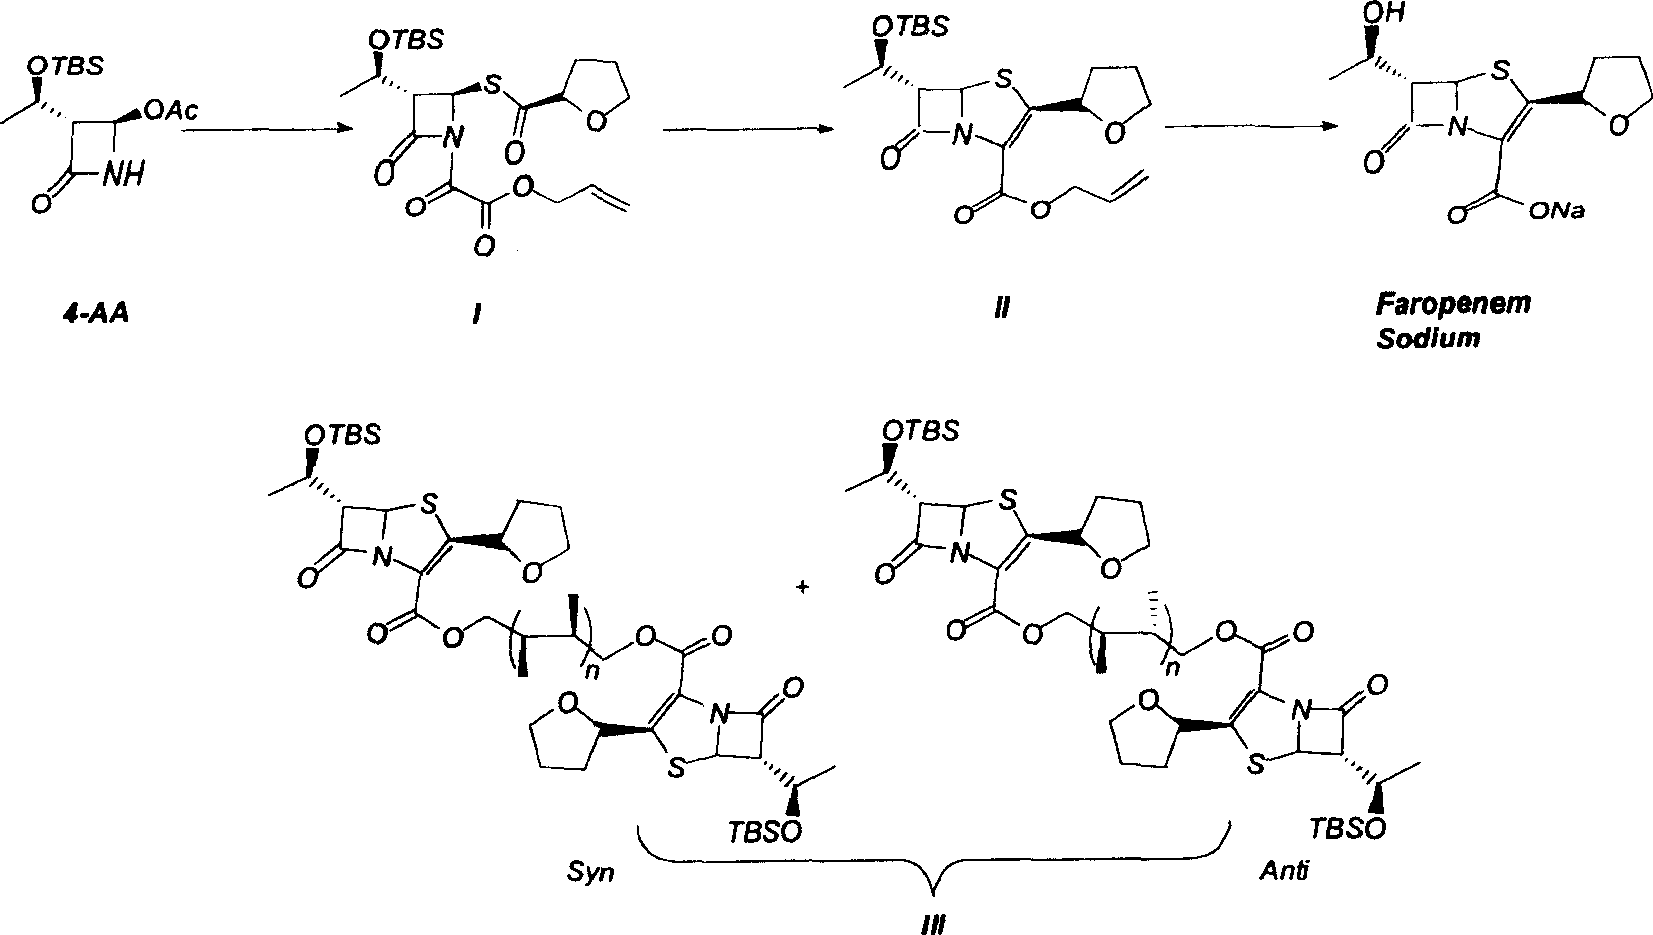 Faropenem sodium synthesis method from reaction by-product